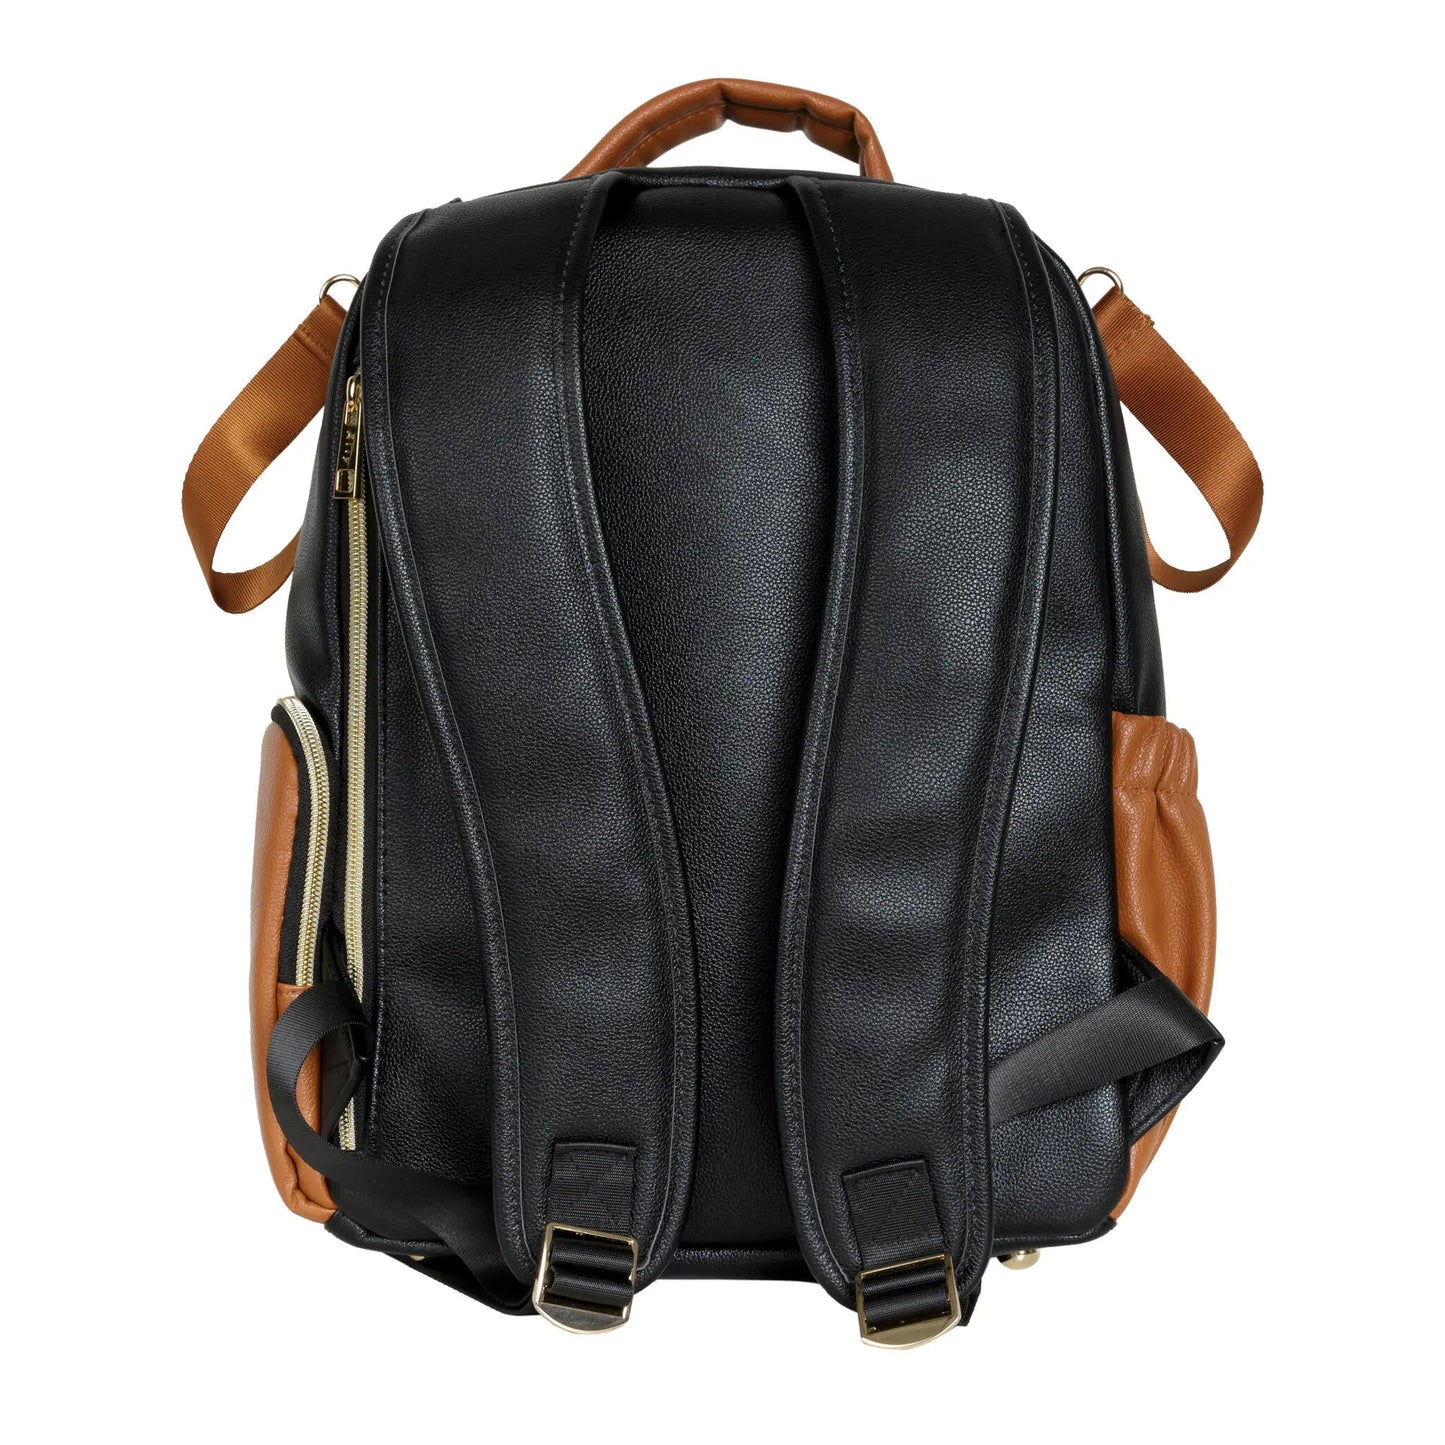 A compact, stylish Small Diaper Backpack in Black Coffee, designed for on-the-go parents. Features include multiple pockets, adjustable straps, and durable vegan leather construction for ultimate convenience and organization.